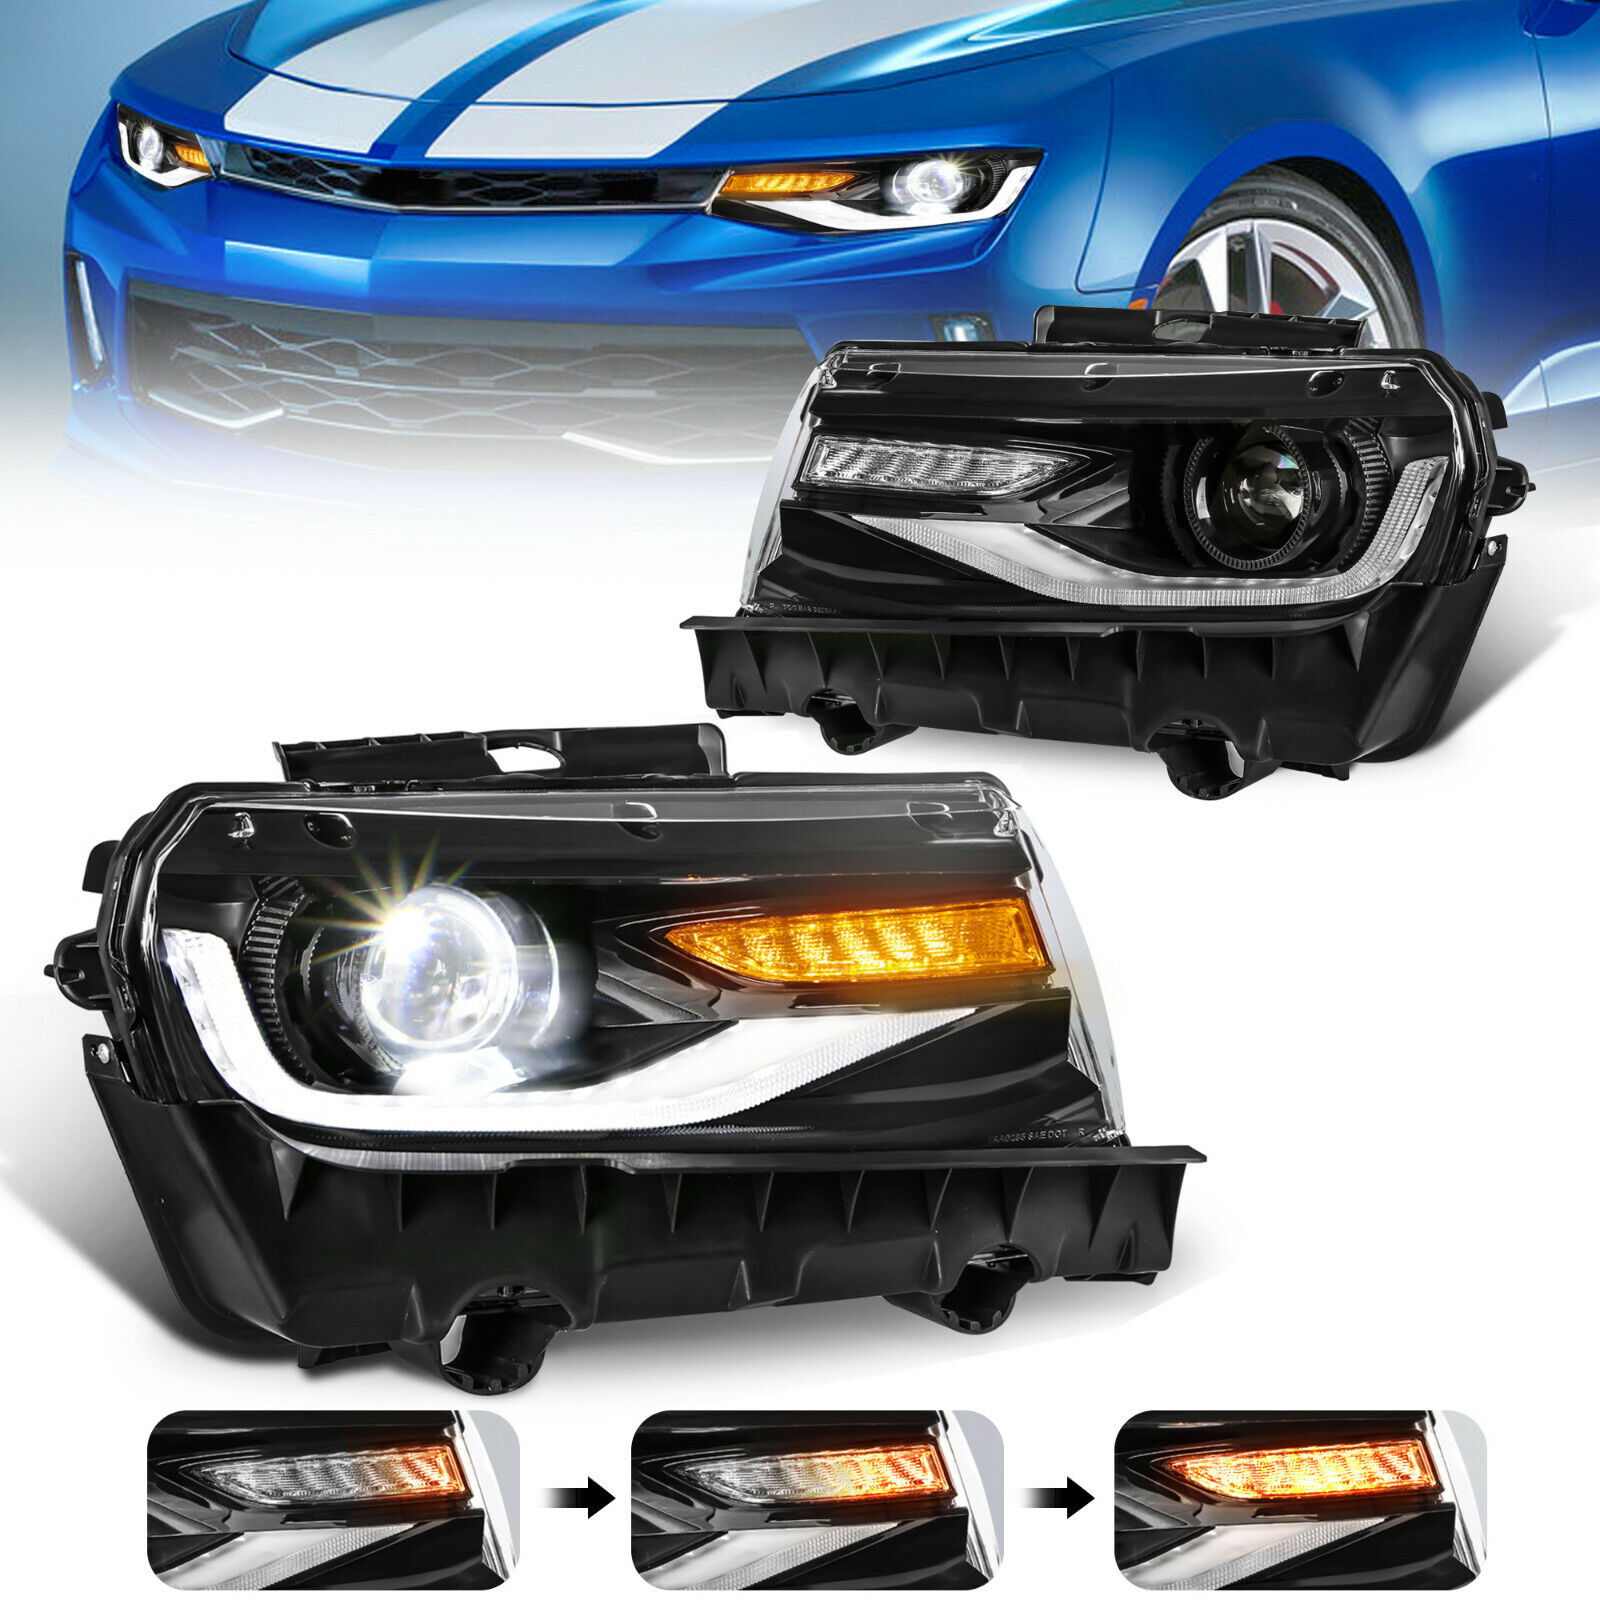 LH+RH LED Projector Headlights Front Lamps For 2014-2015 Chevrolet Chevy Camaro